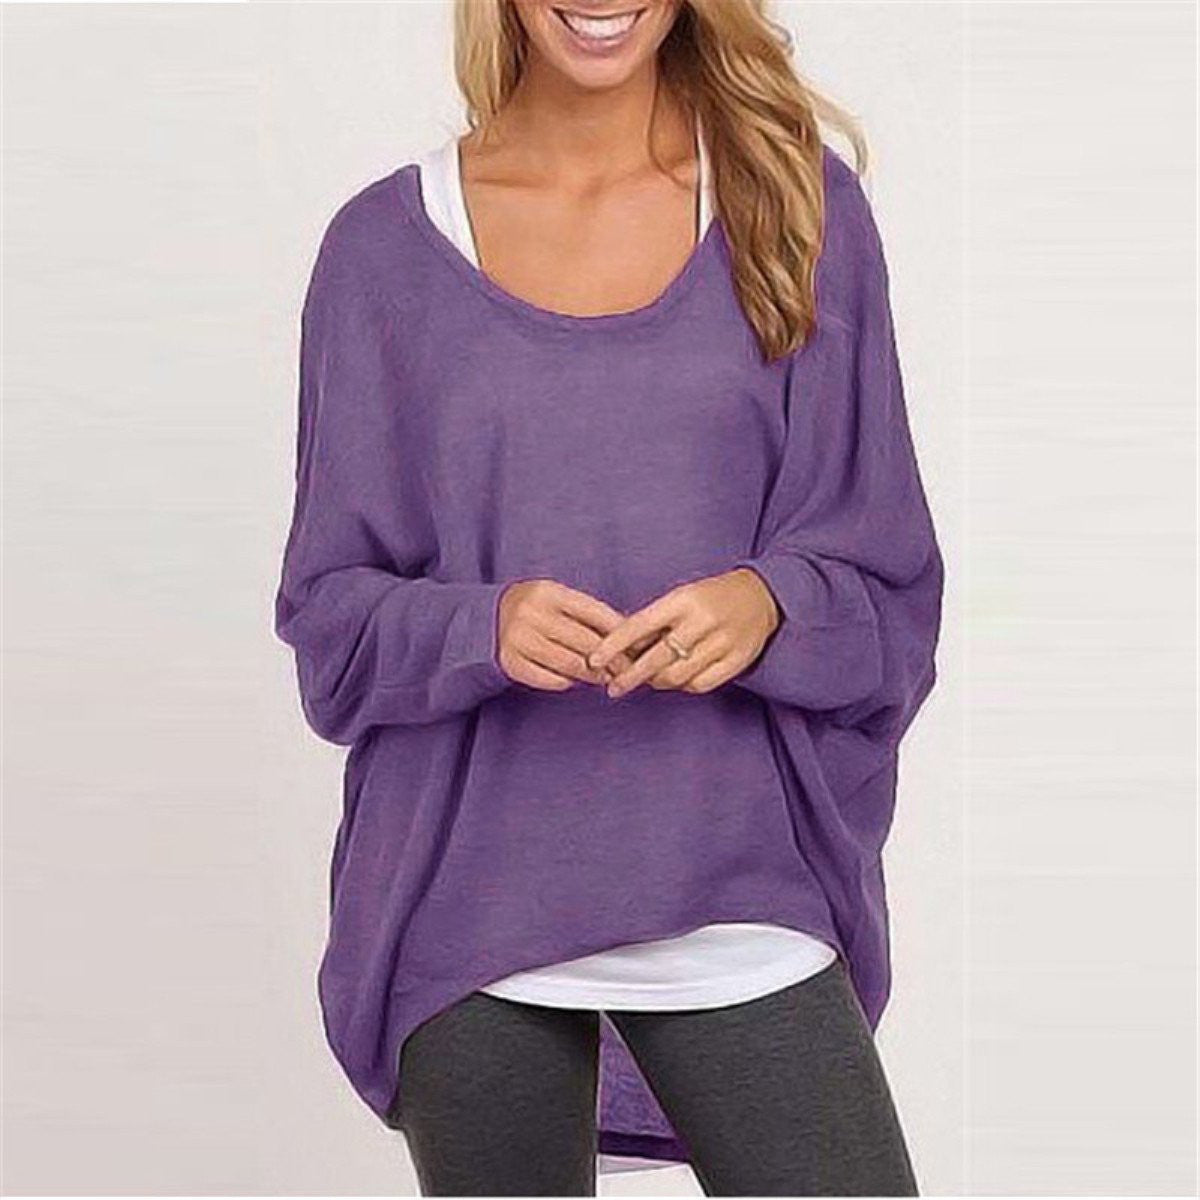 Women Blouses O neck Batwing Long Sleeve Casual Loose Solid Shirts Top Plus Size S-3XL 9 Colors